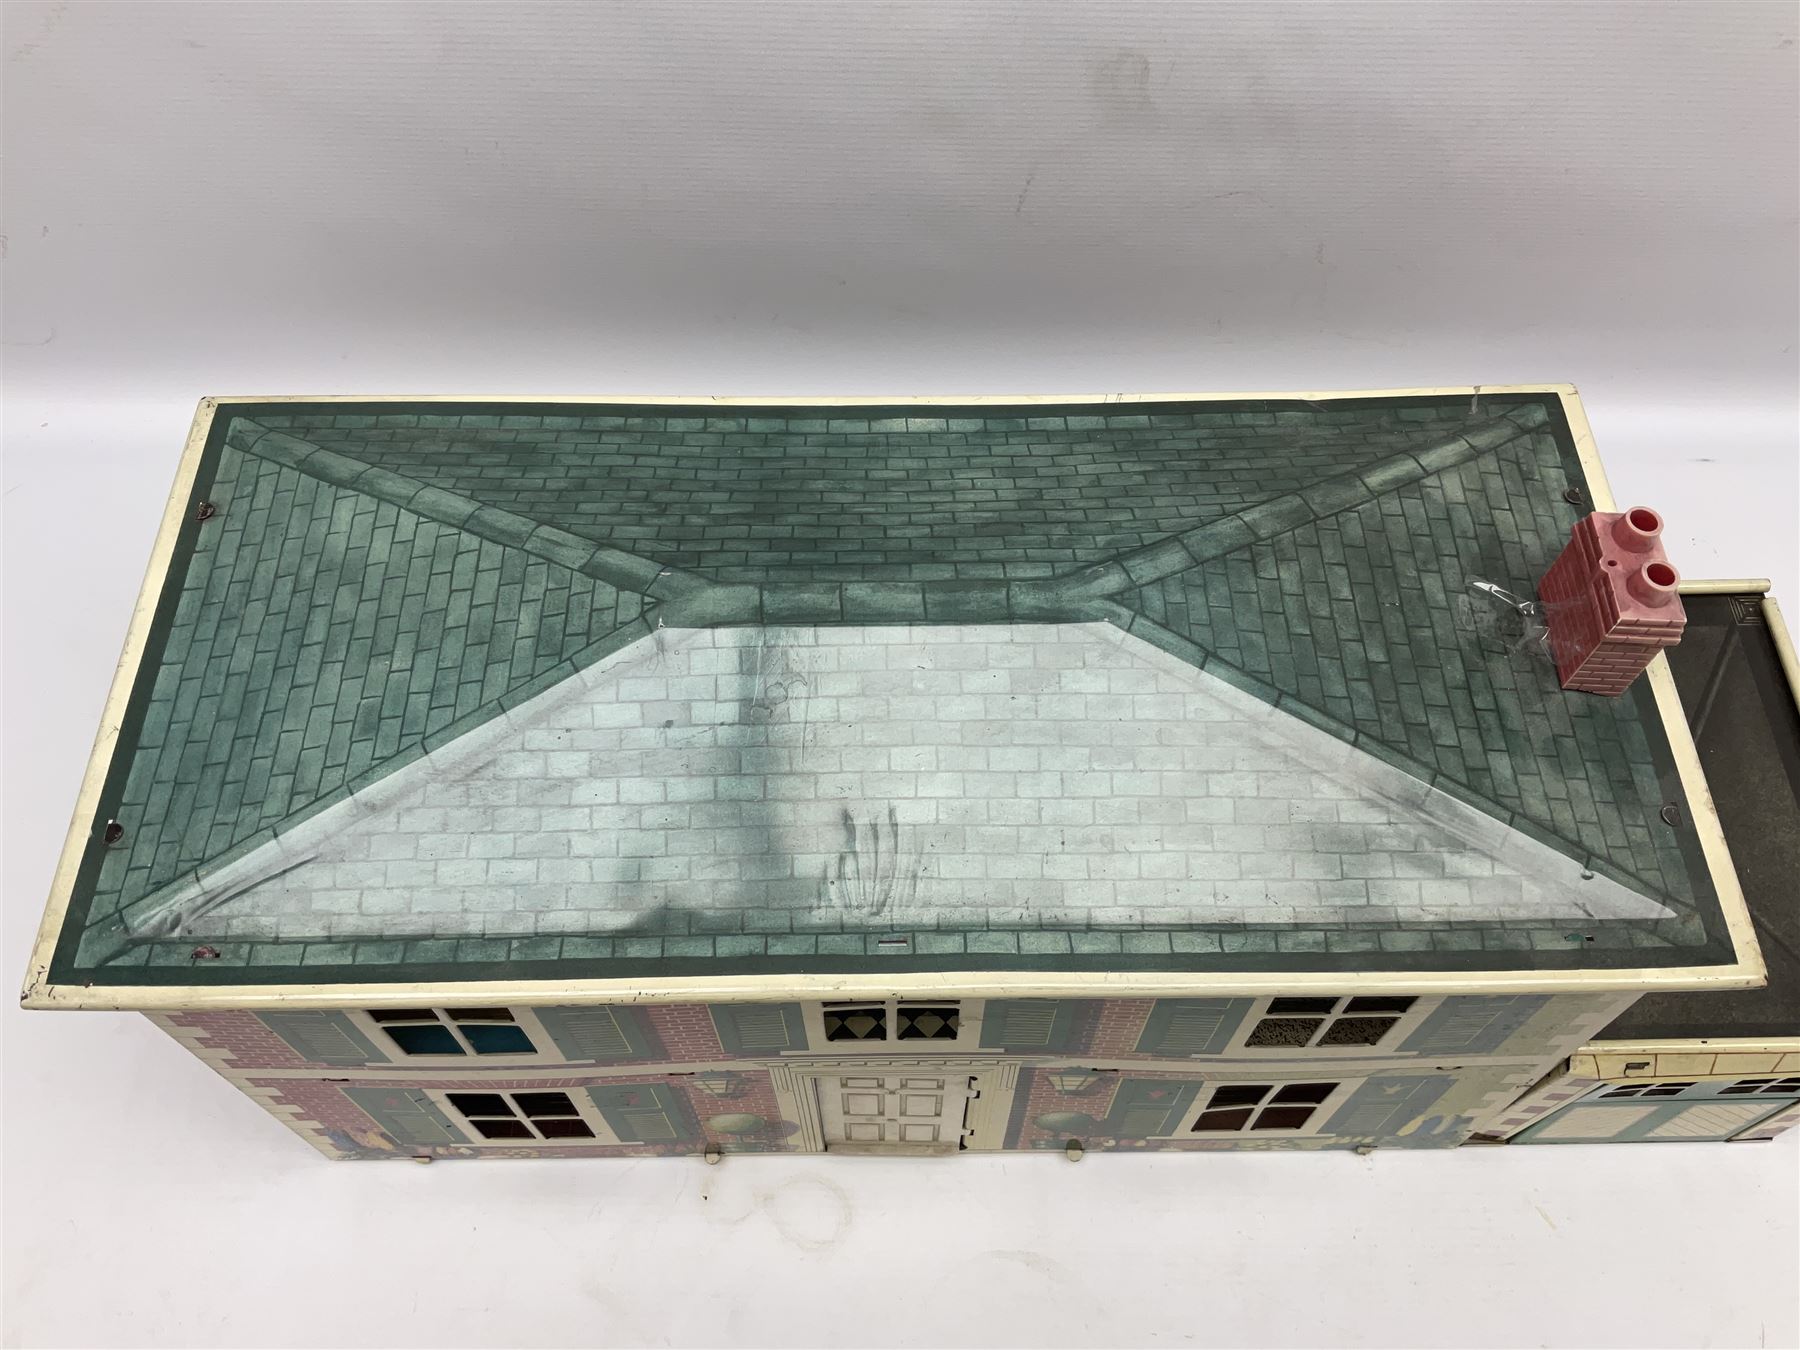 Mid-20th century Mettoy tin-plate double-fronted two-storey doll's house - Image 4 of 11